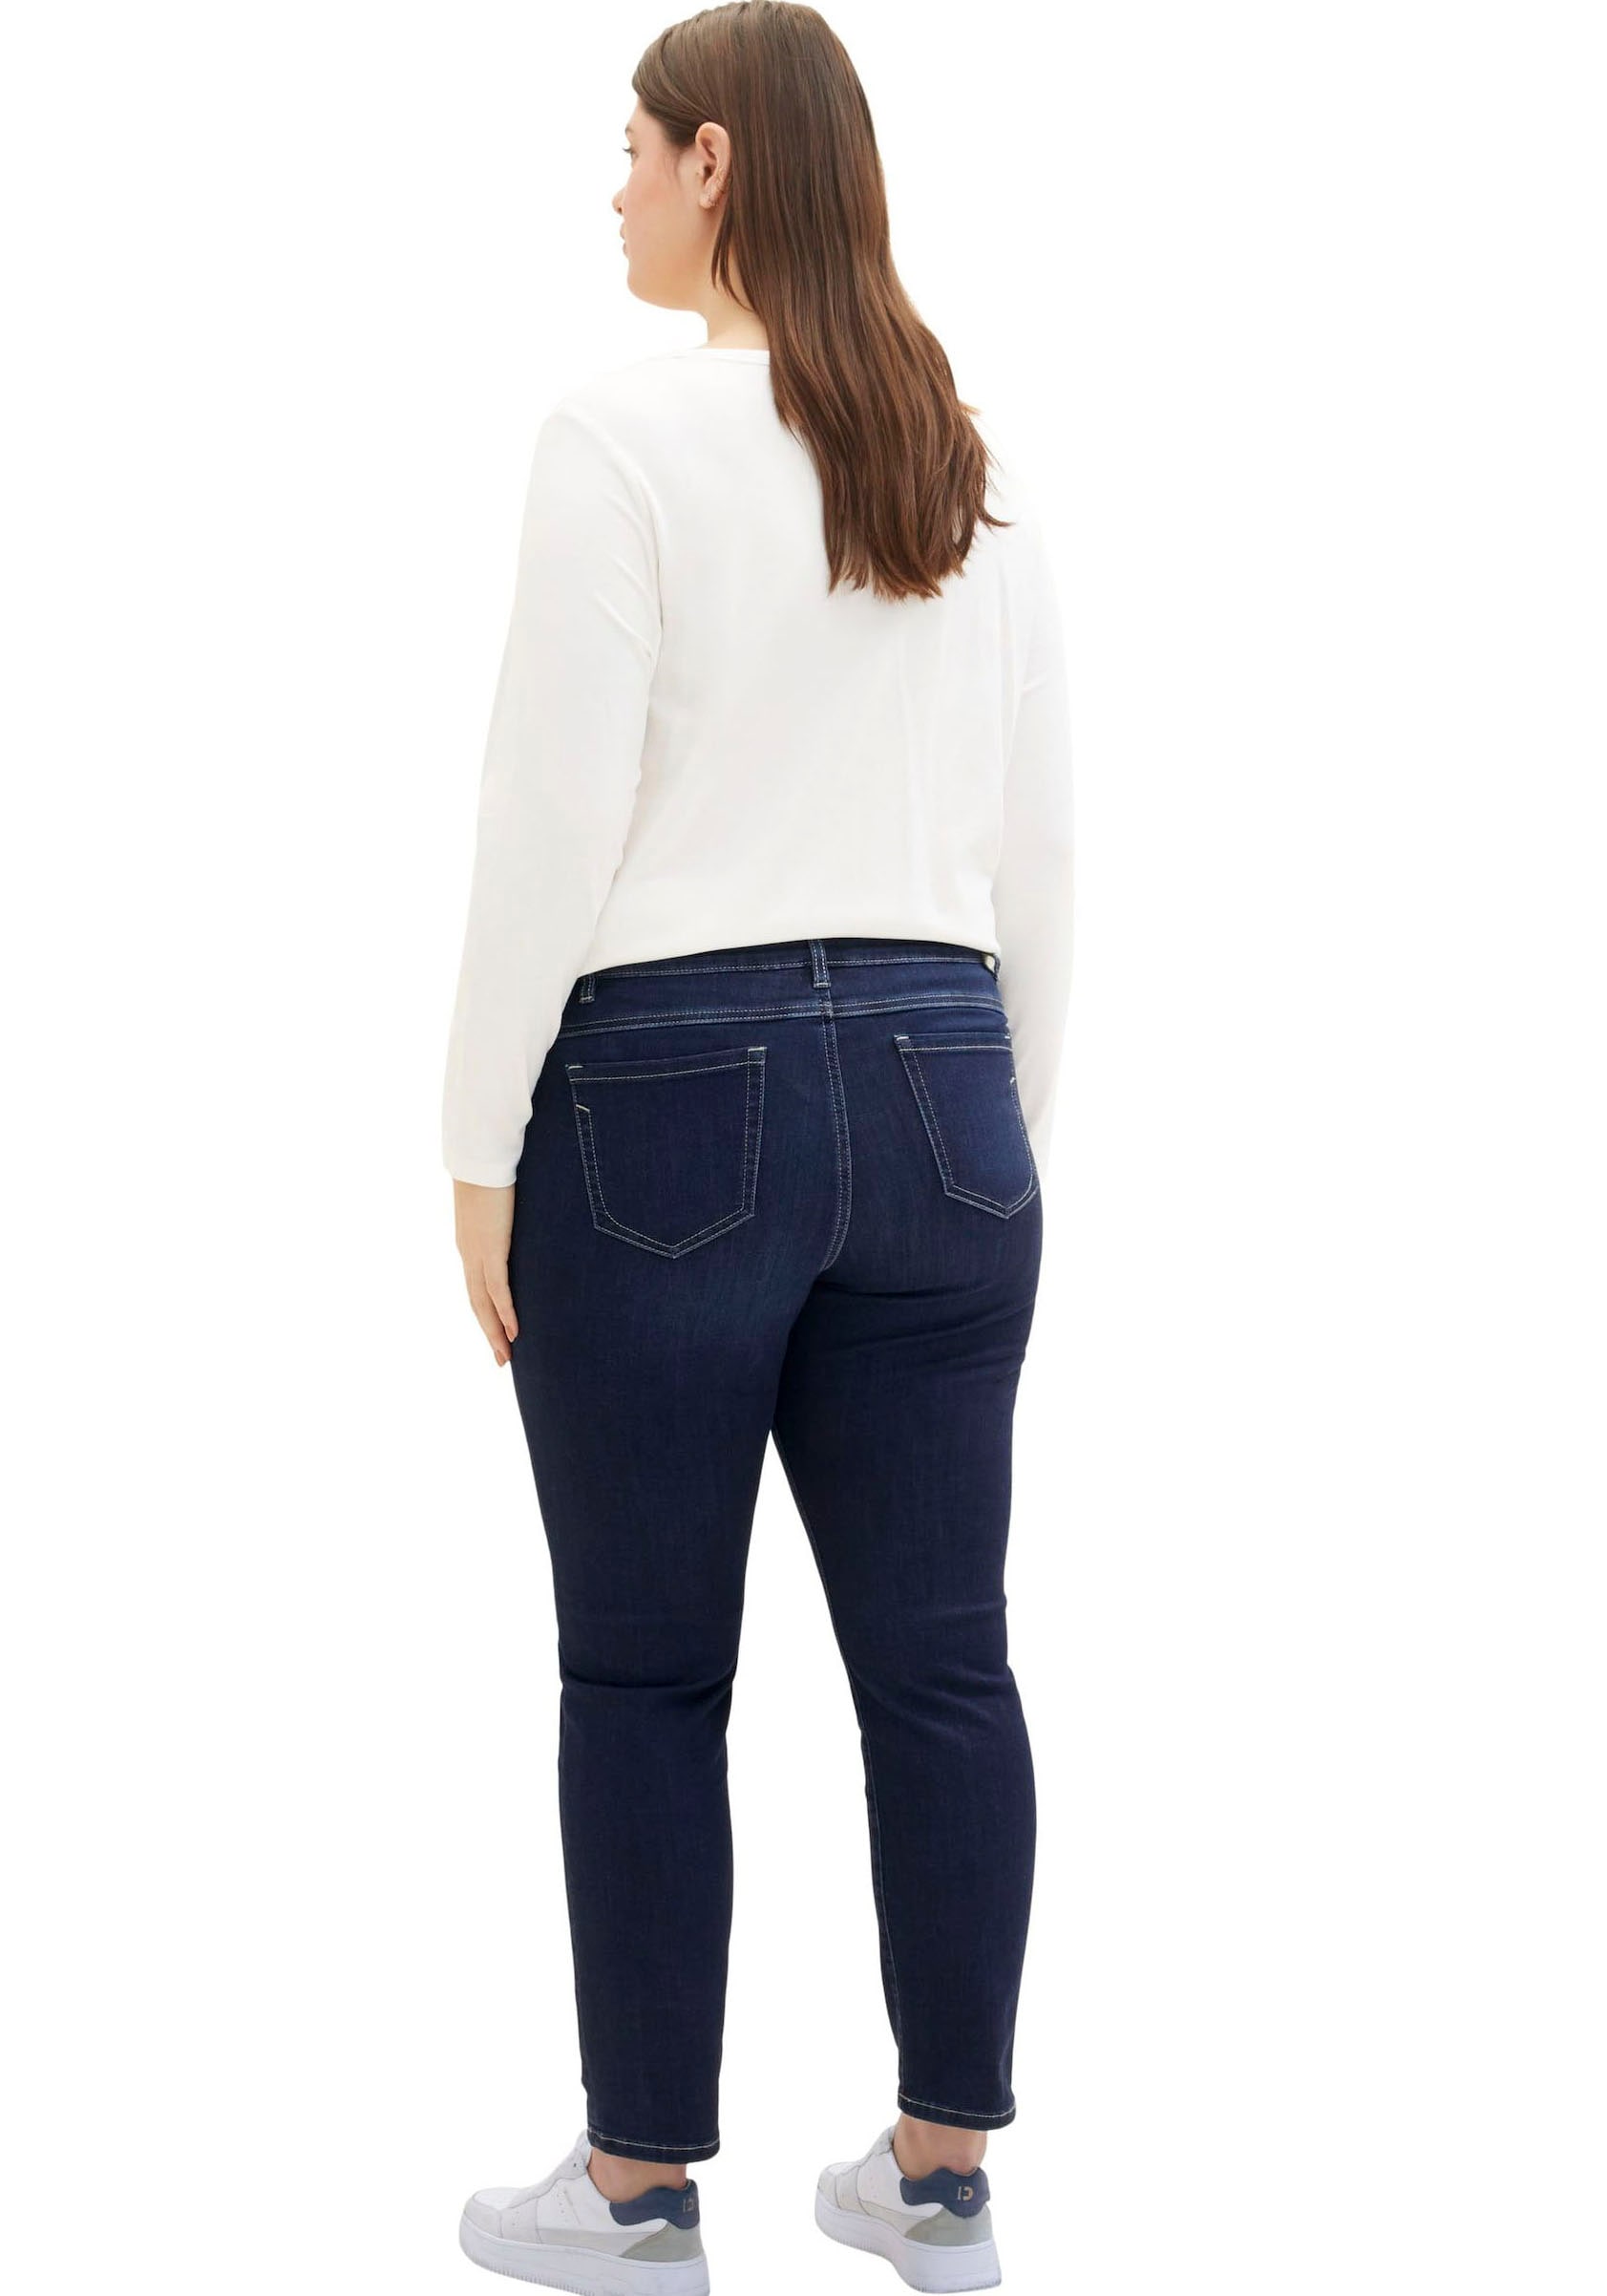 Five-Pocket-Style bei Relax-fit-Jeans, TOM TAILOR ♕ im PLUS